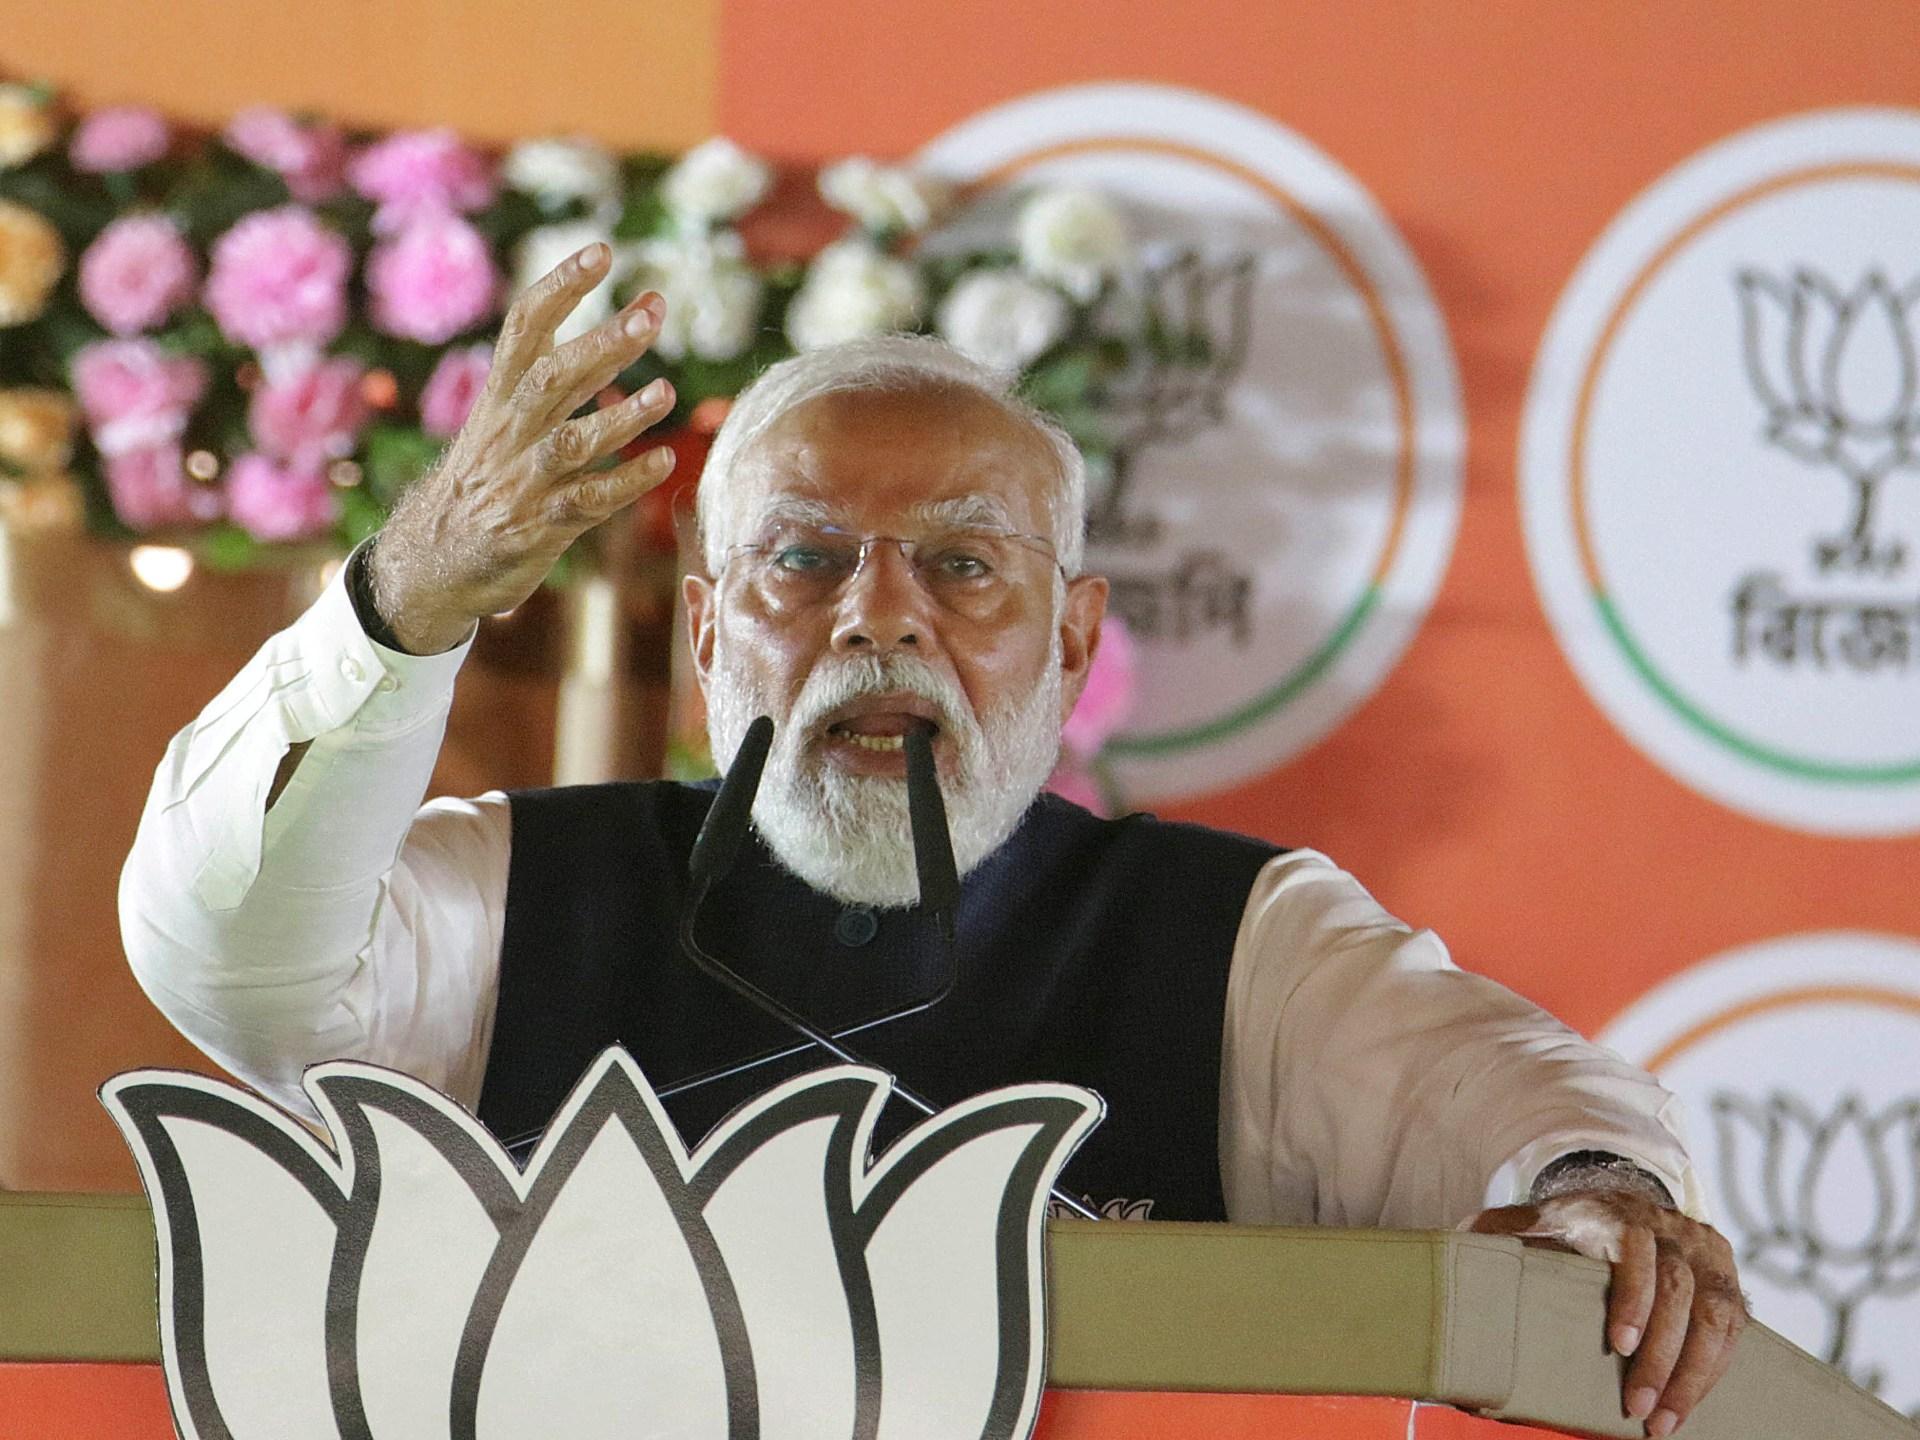 Modi is accused of anti-Muslim hate speech during India election